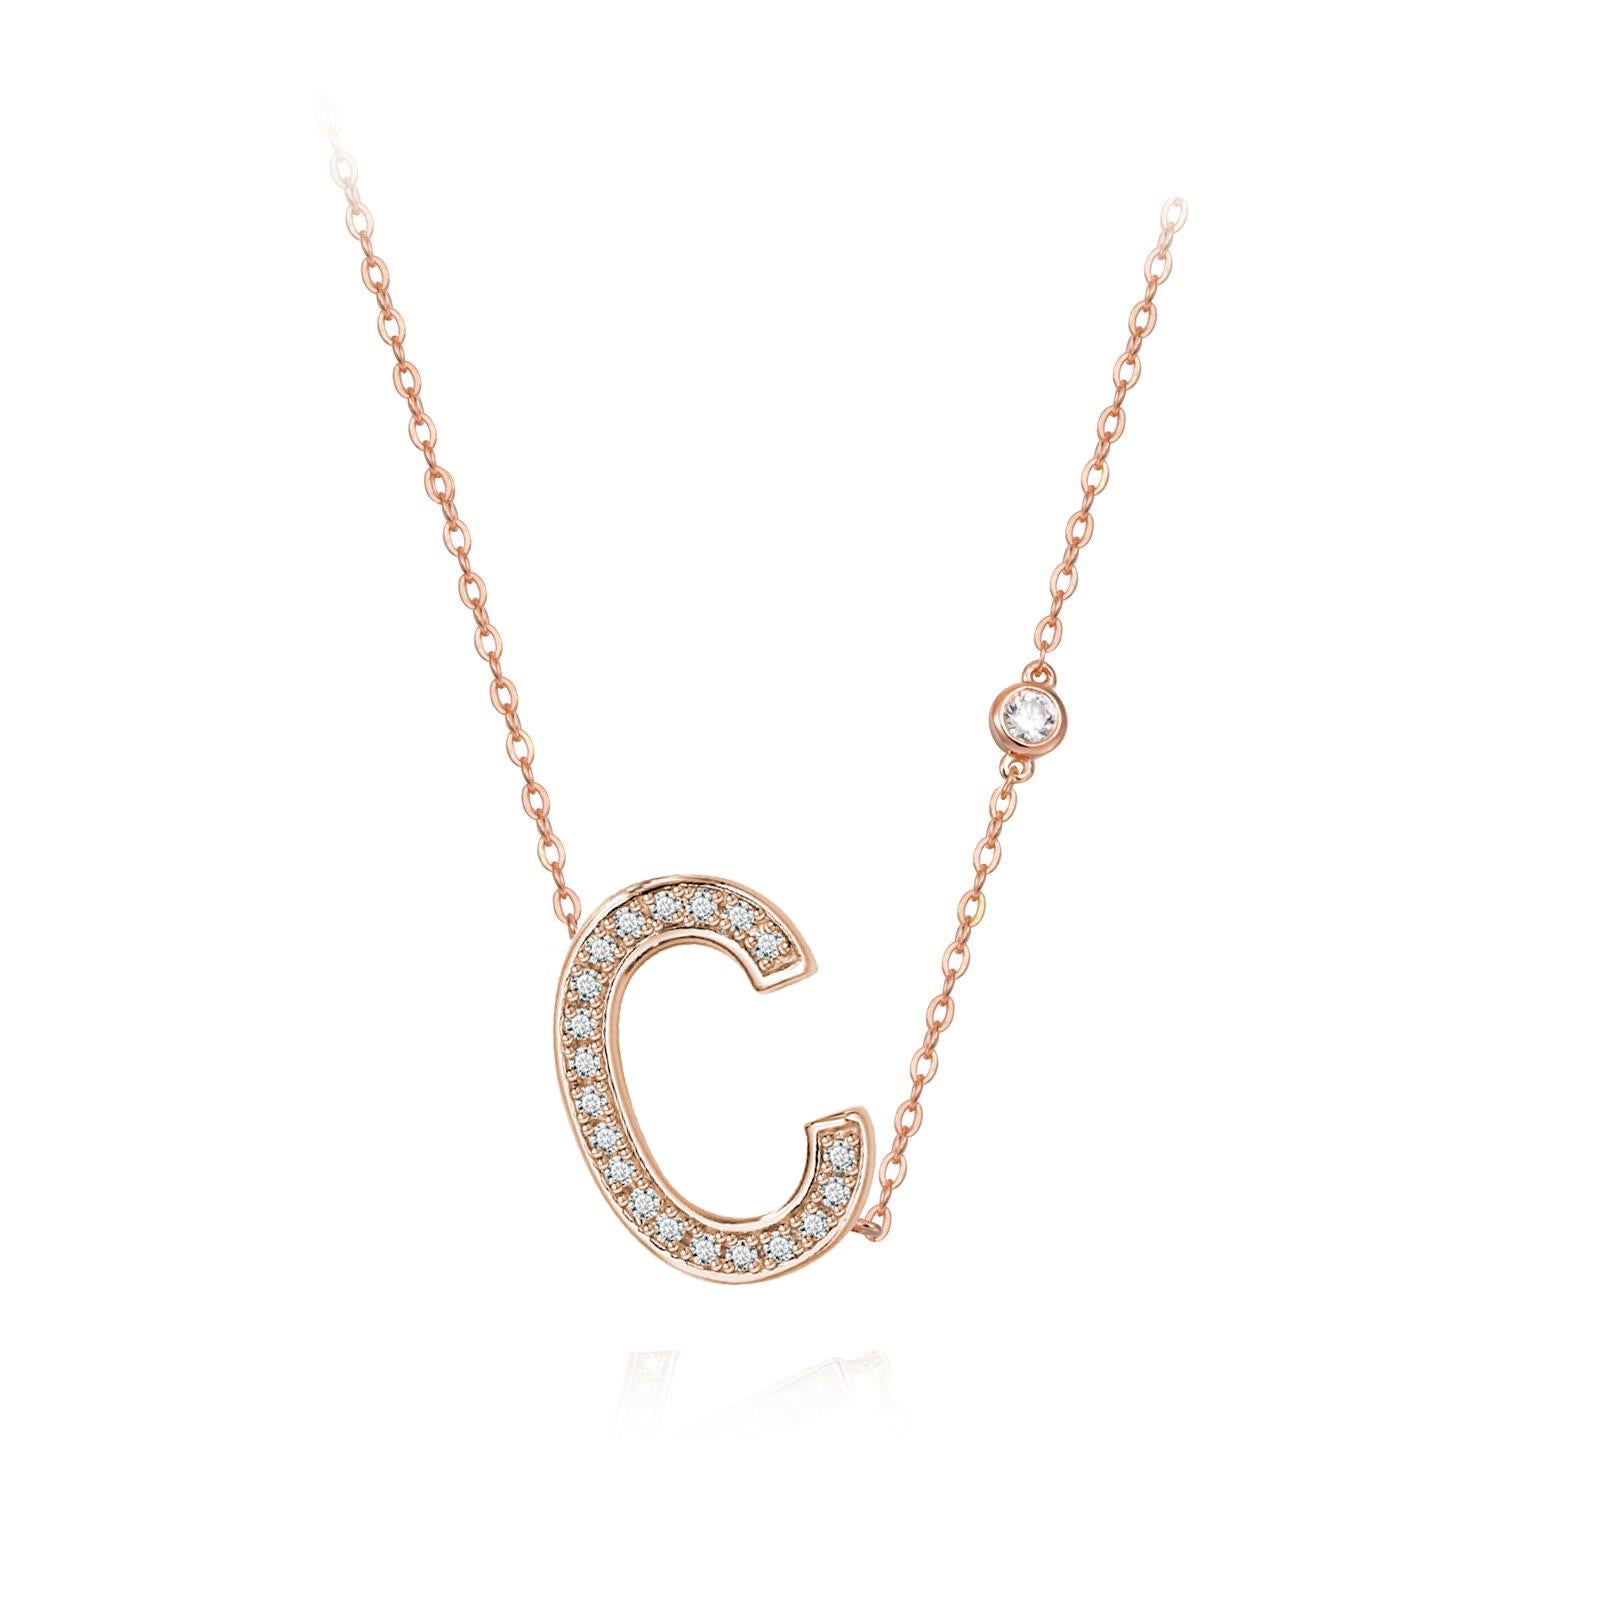 Nothing says YOU more than YOU. You are unique. You are bold. You're not afraid to share who you are. This initial bezel chain necklace is elegantly slimline while sharing a little bit about yourself with others. .925 sterling silver base also